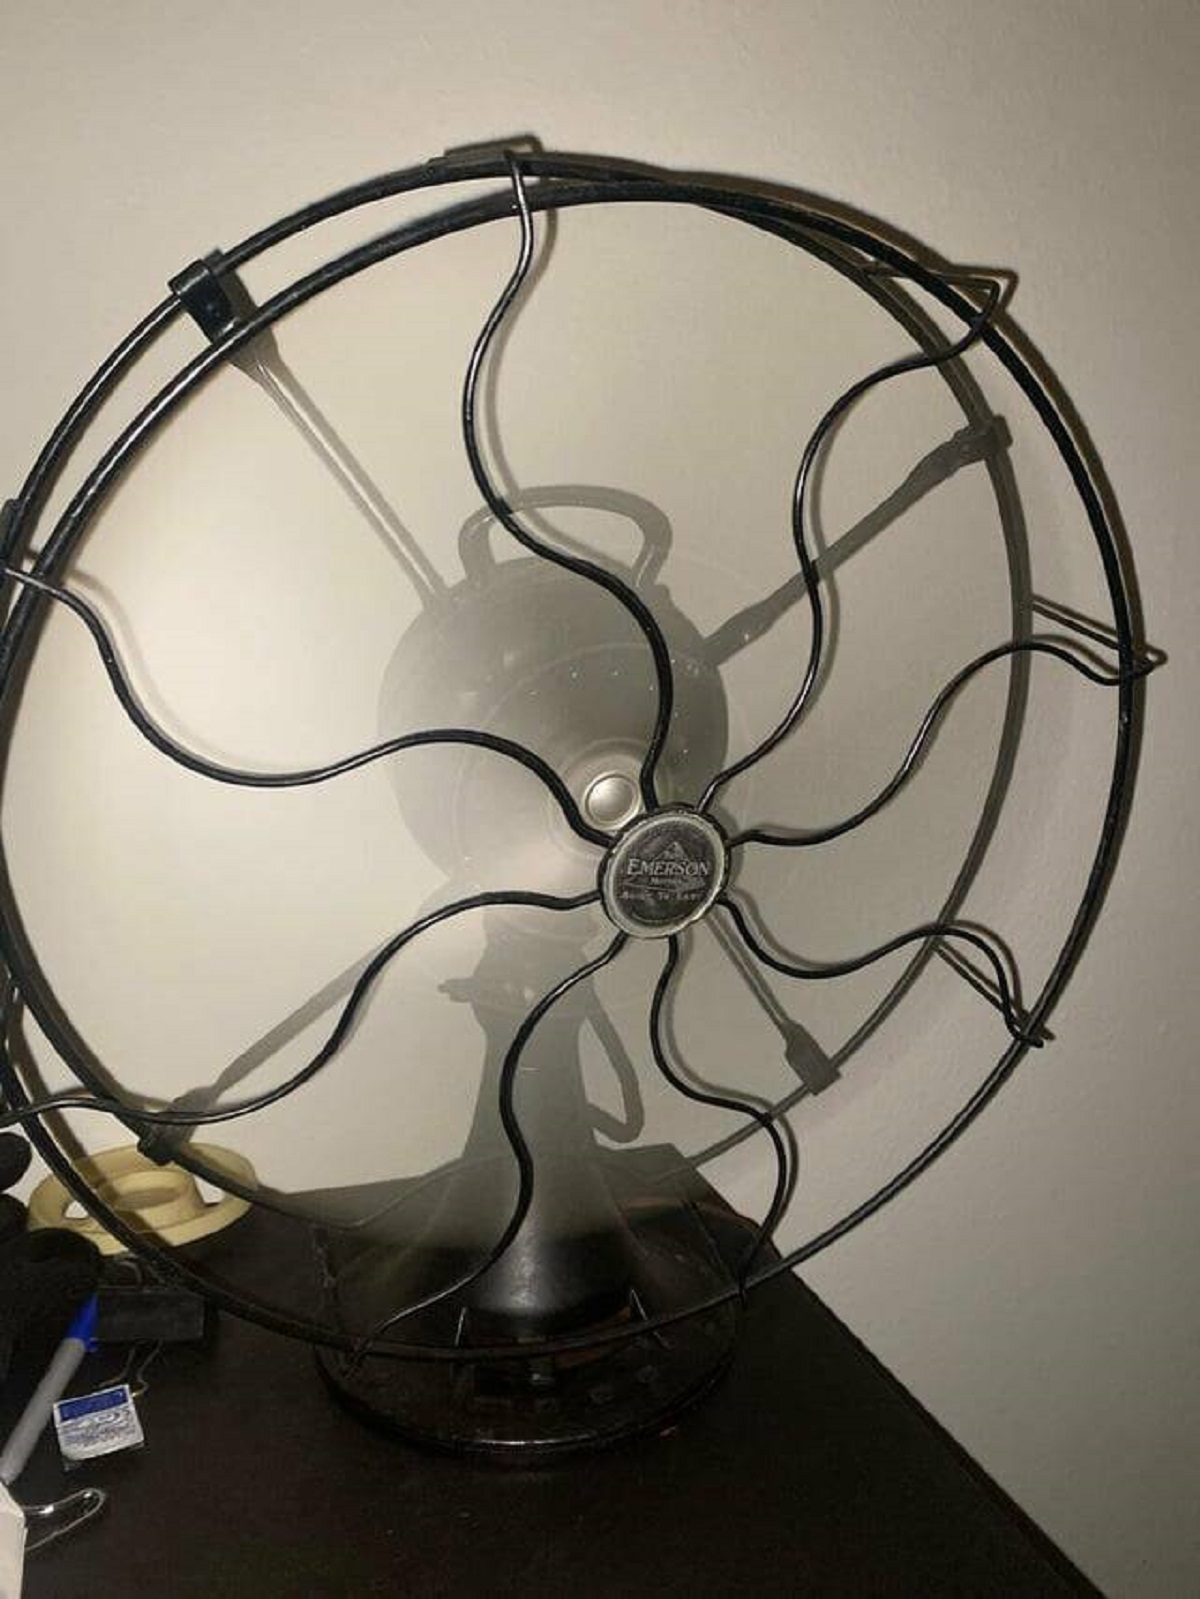 "My fan from 1934 still being used every day"